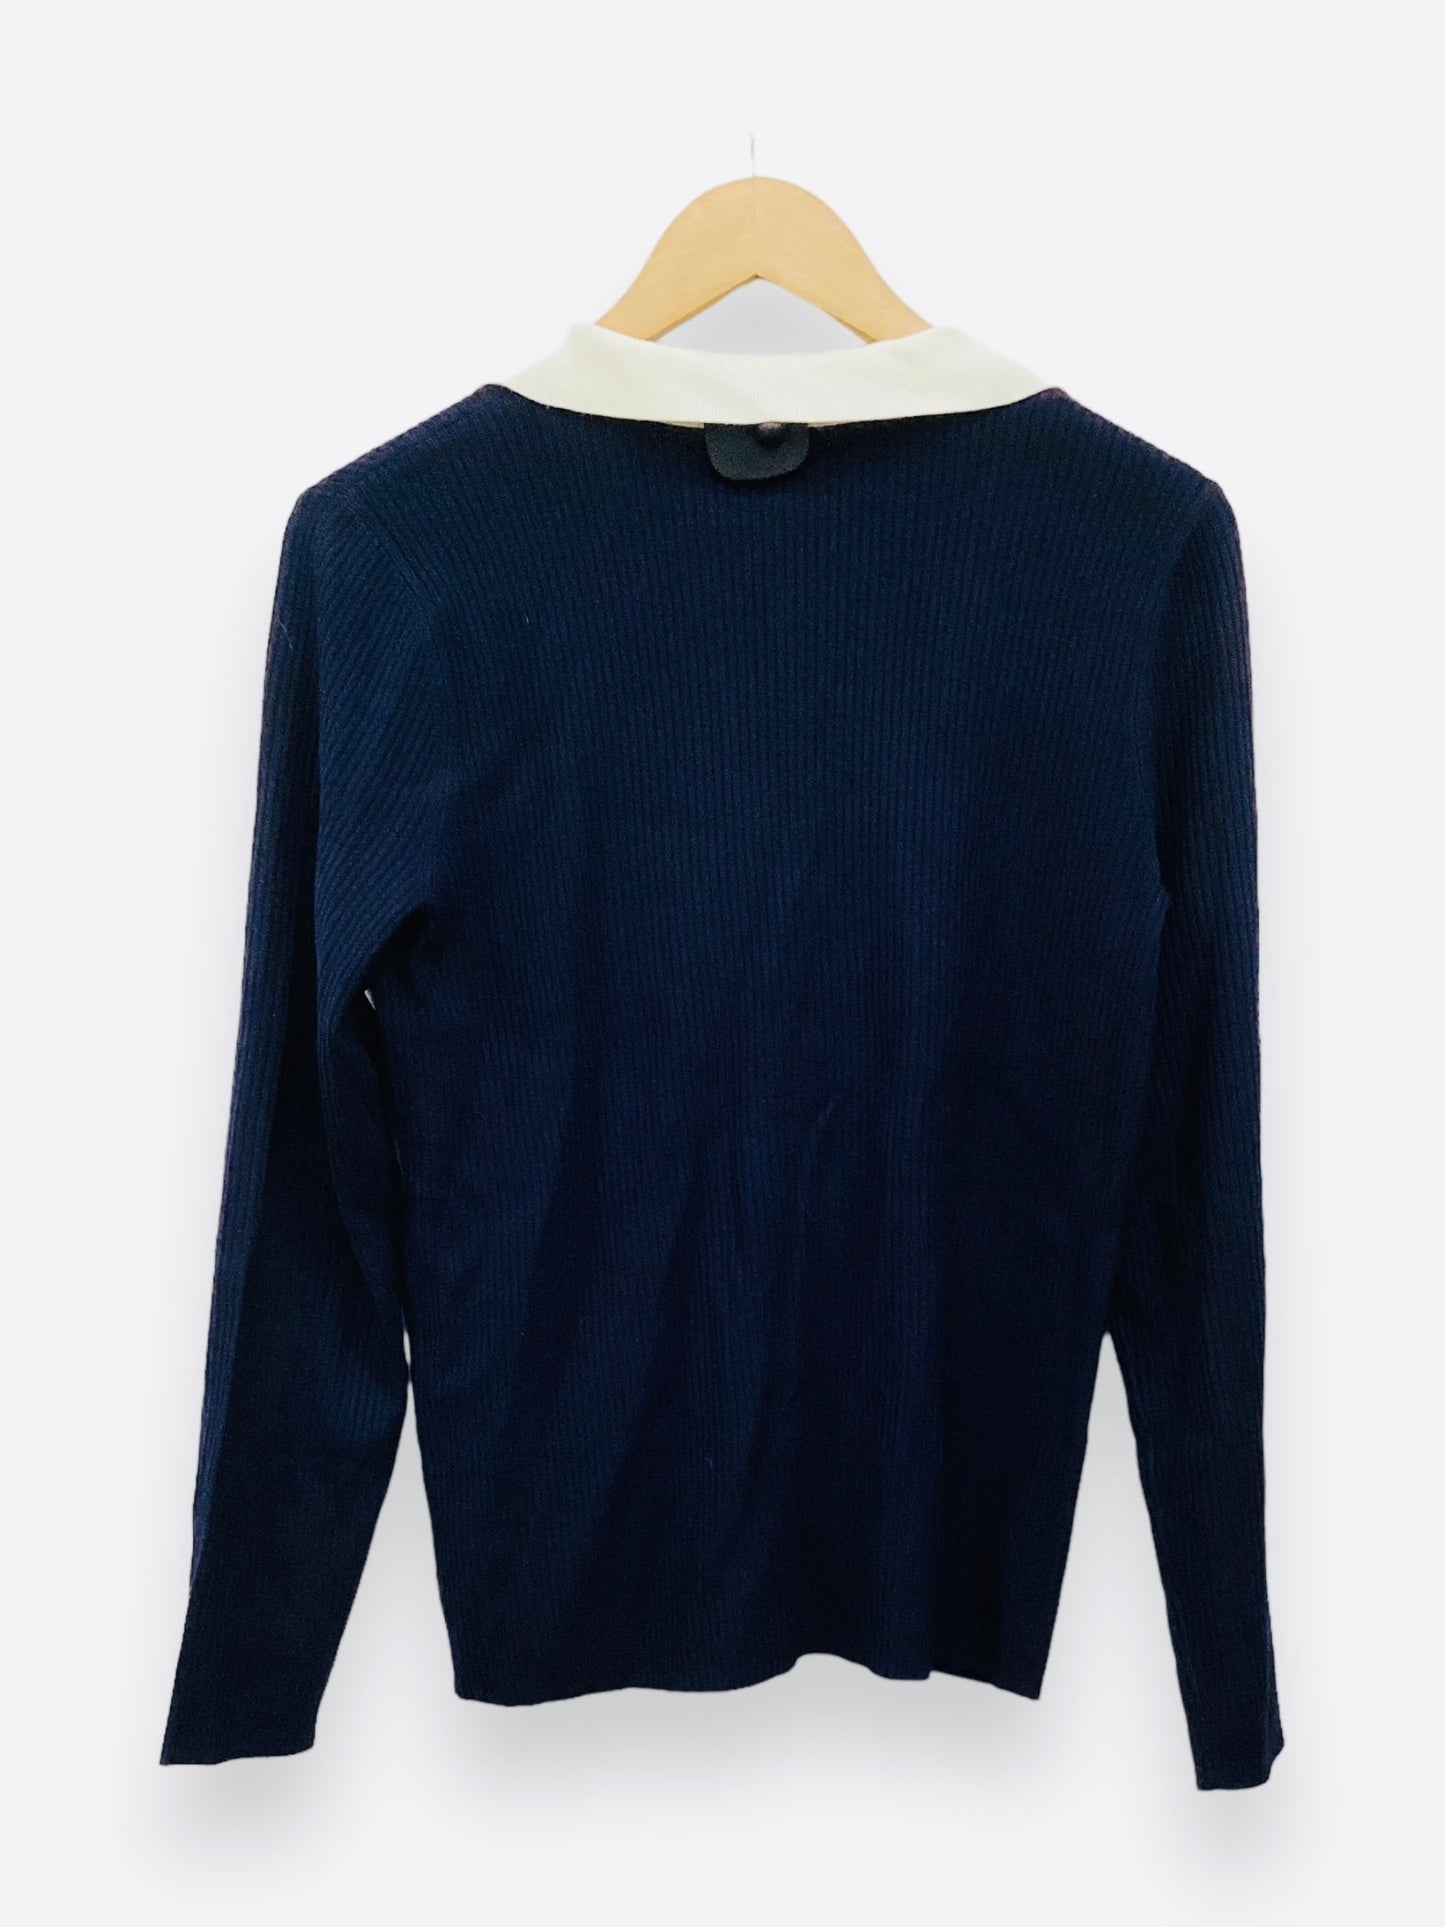 NWT Navy Top Long Sleeve Talbots, Size M